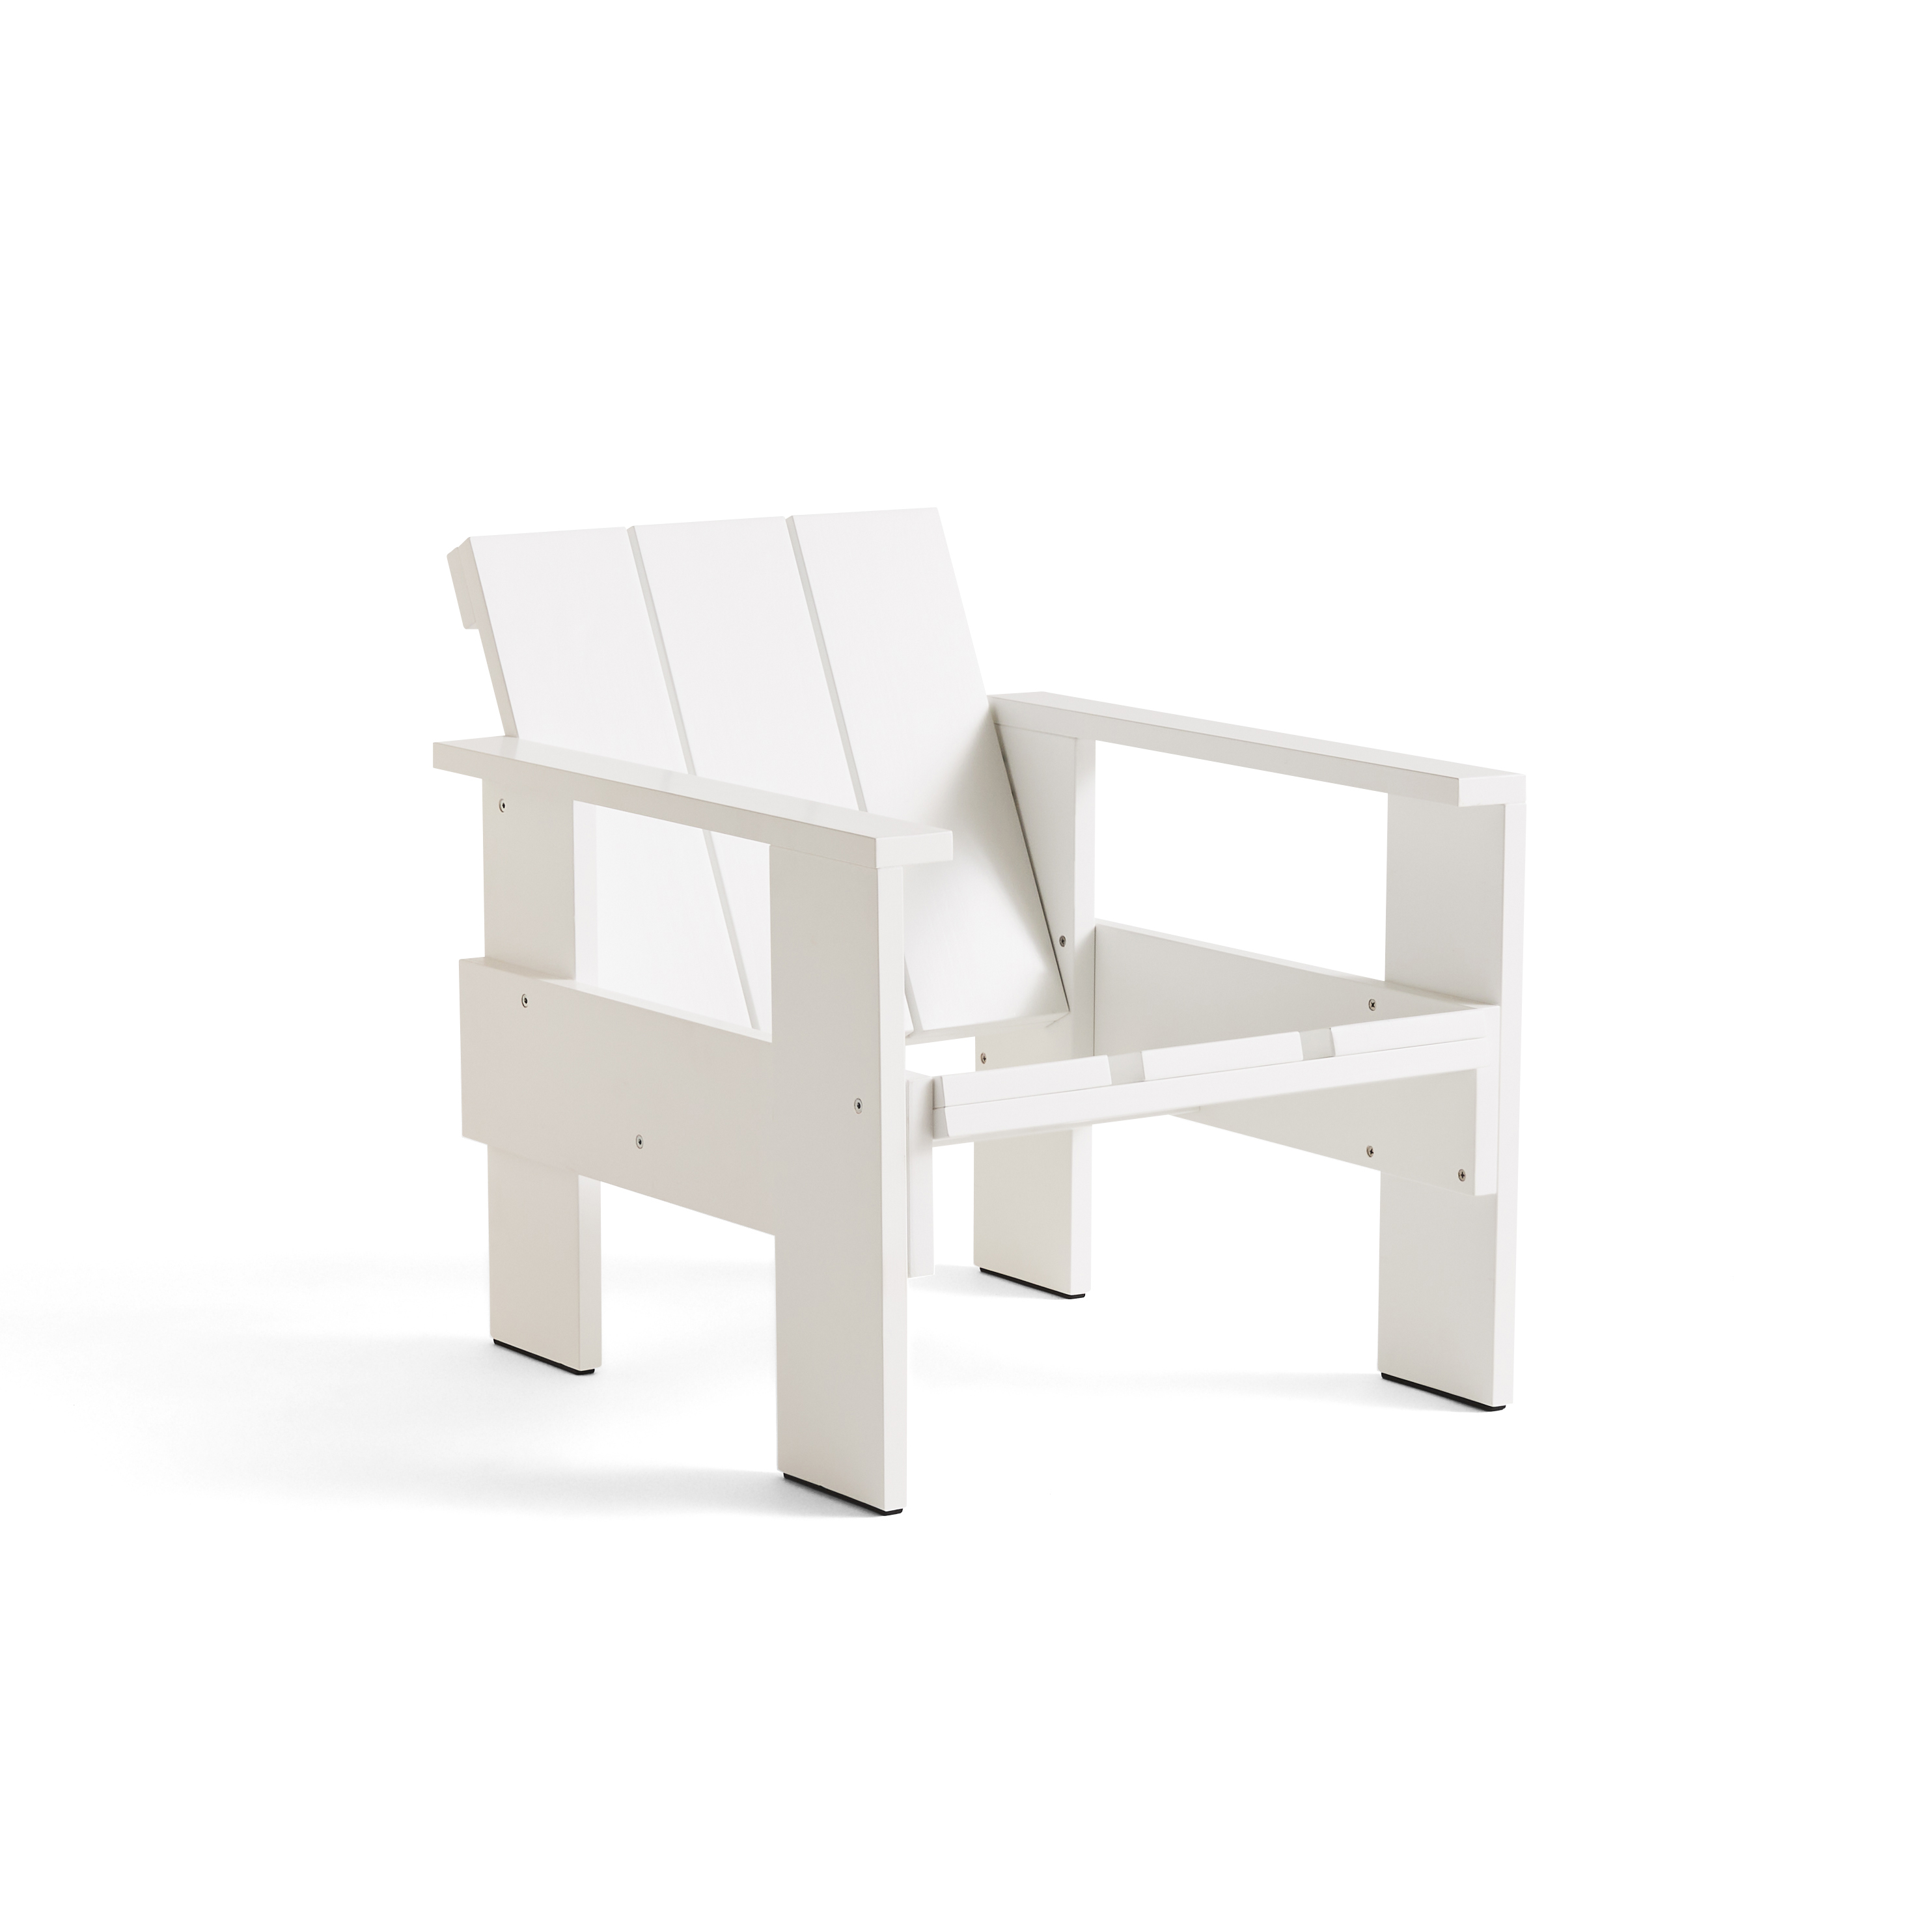 Crate lounge chair - White waterbased lacq pinewood